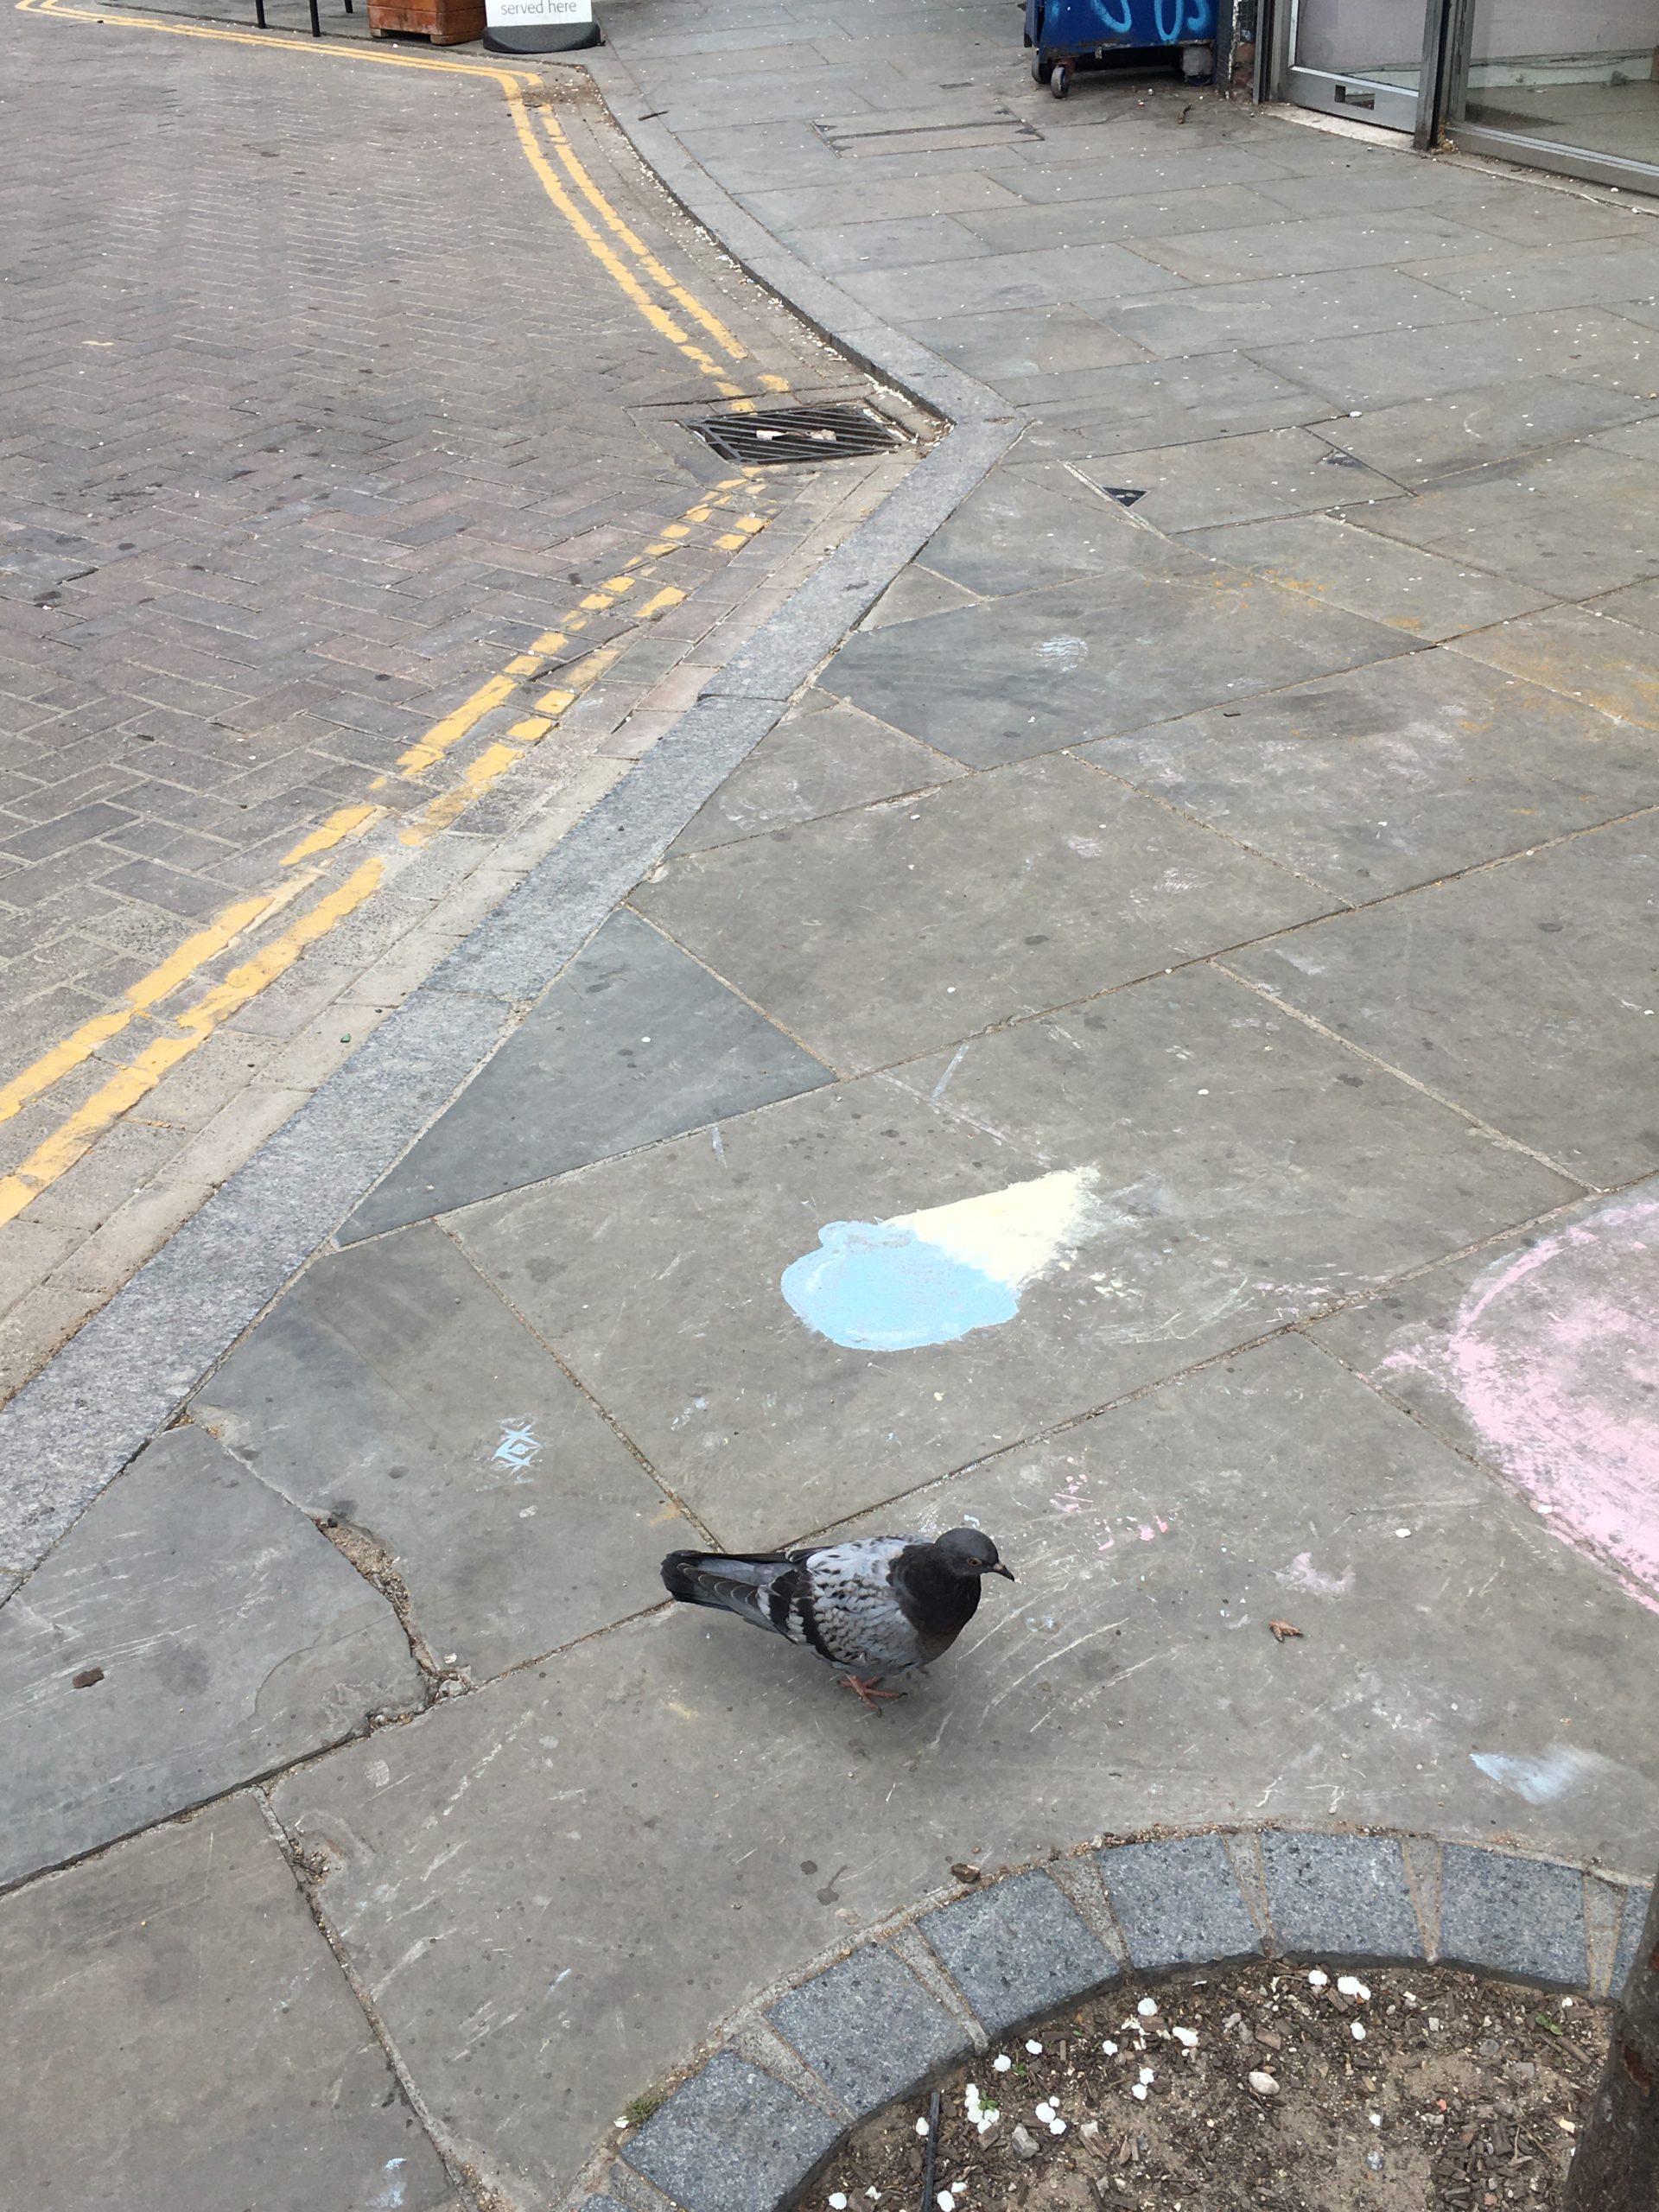 An ice cream chalked onto the pavement with a pigeon walking by in my neighbourhood